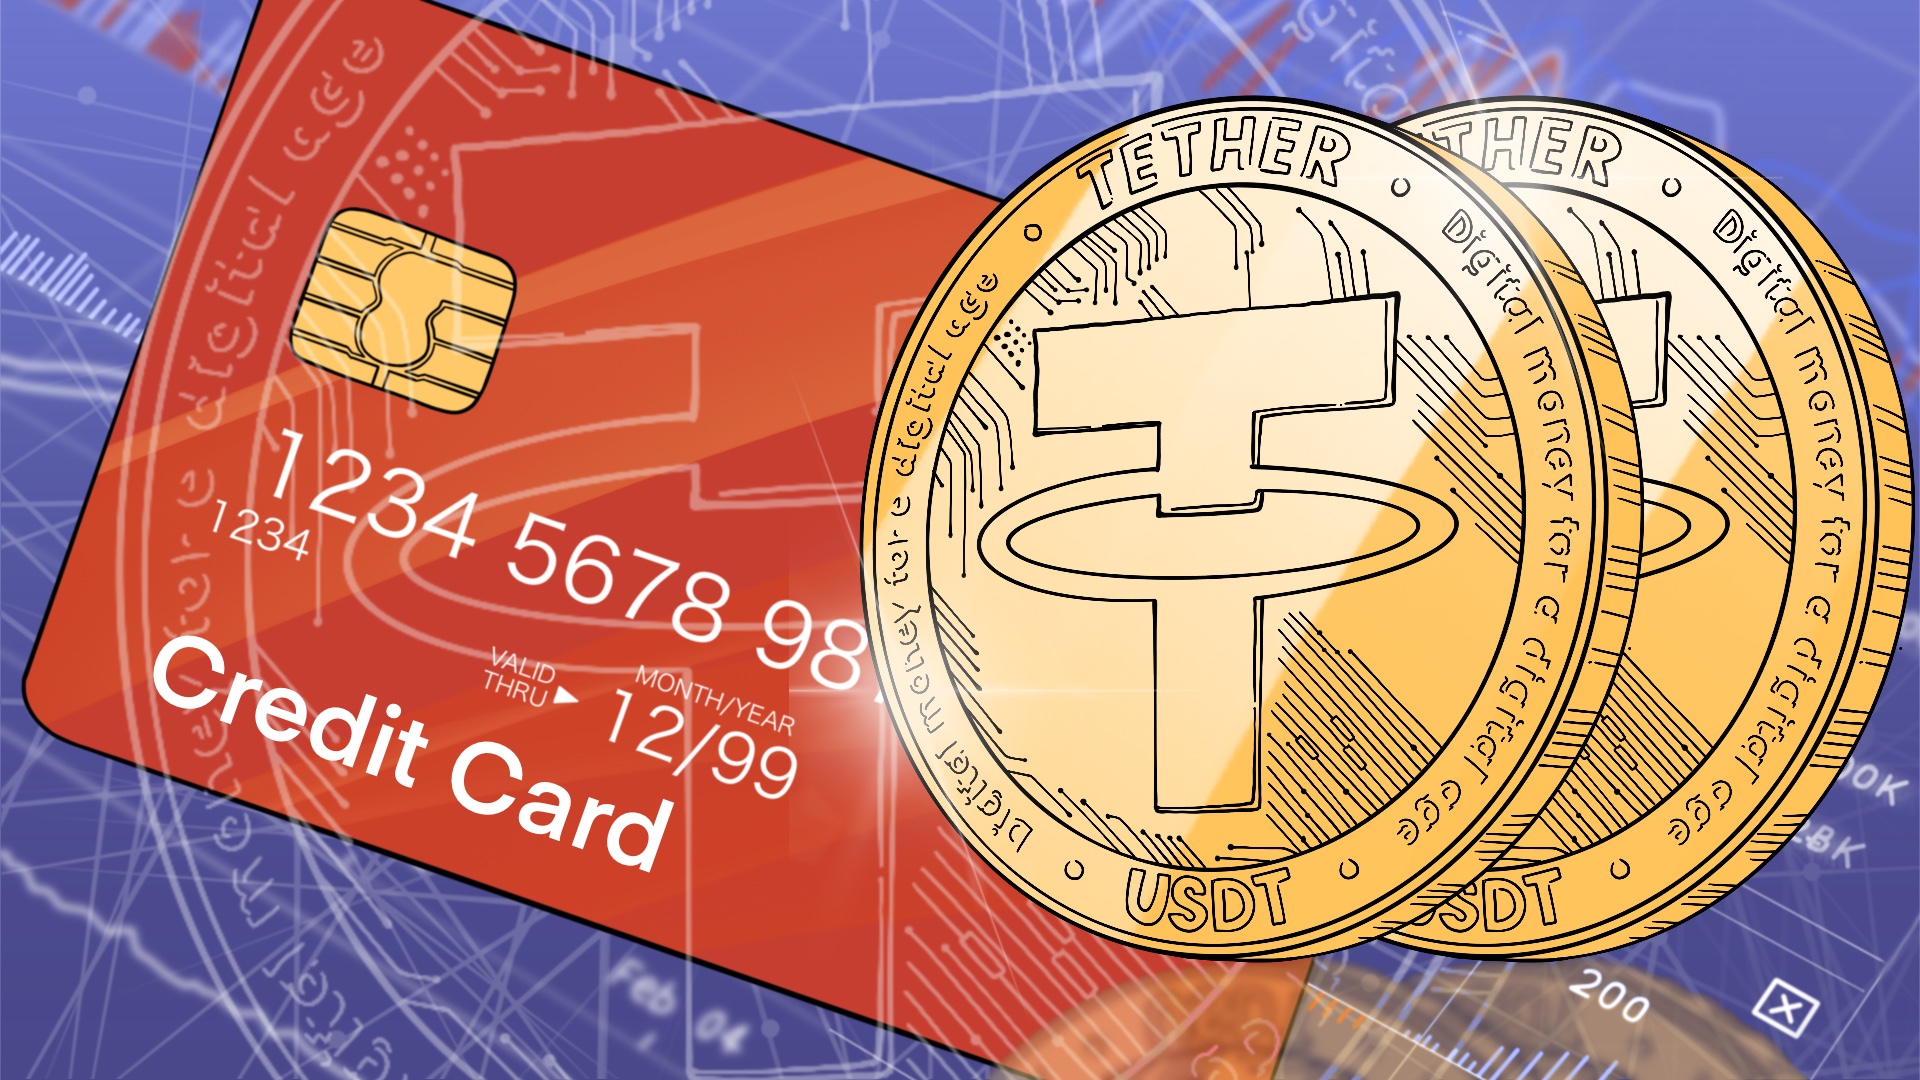 Buy USDT With Credit Card